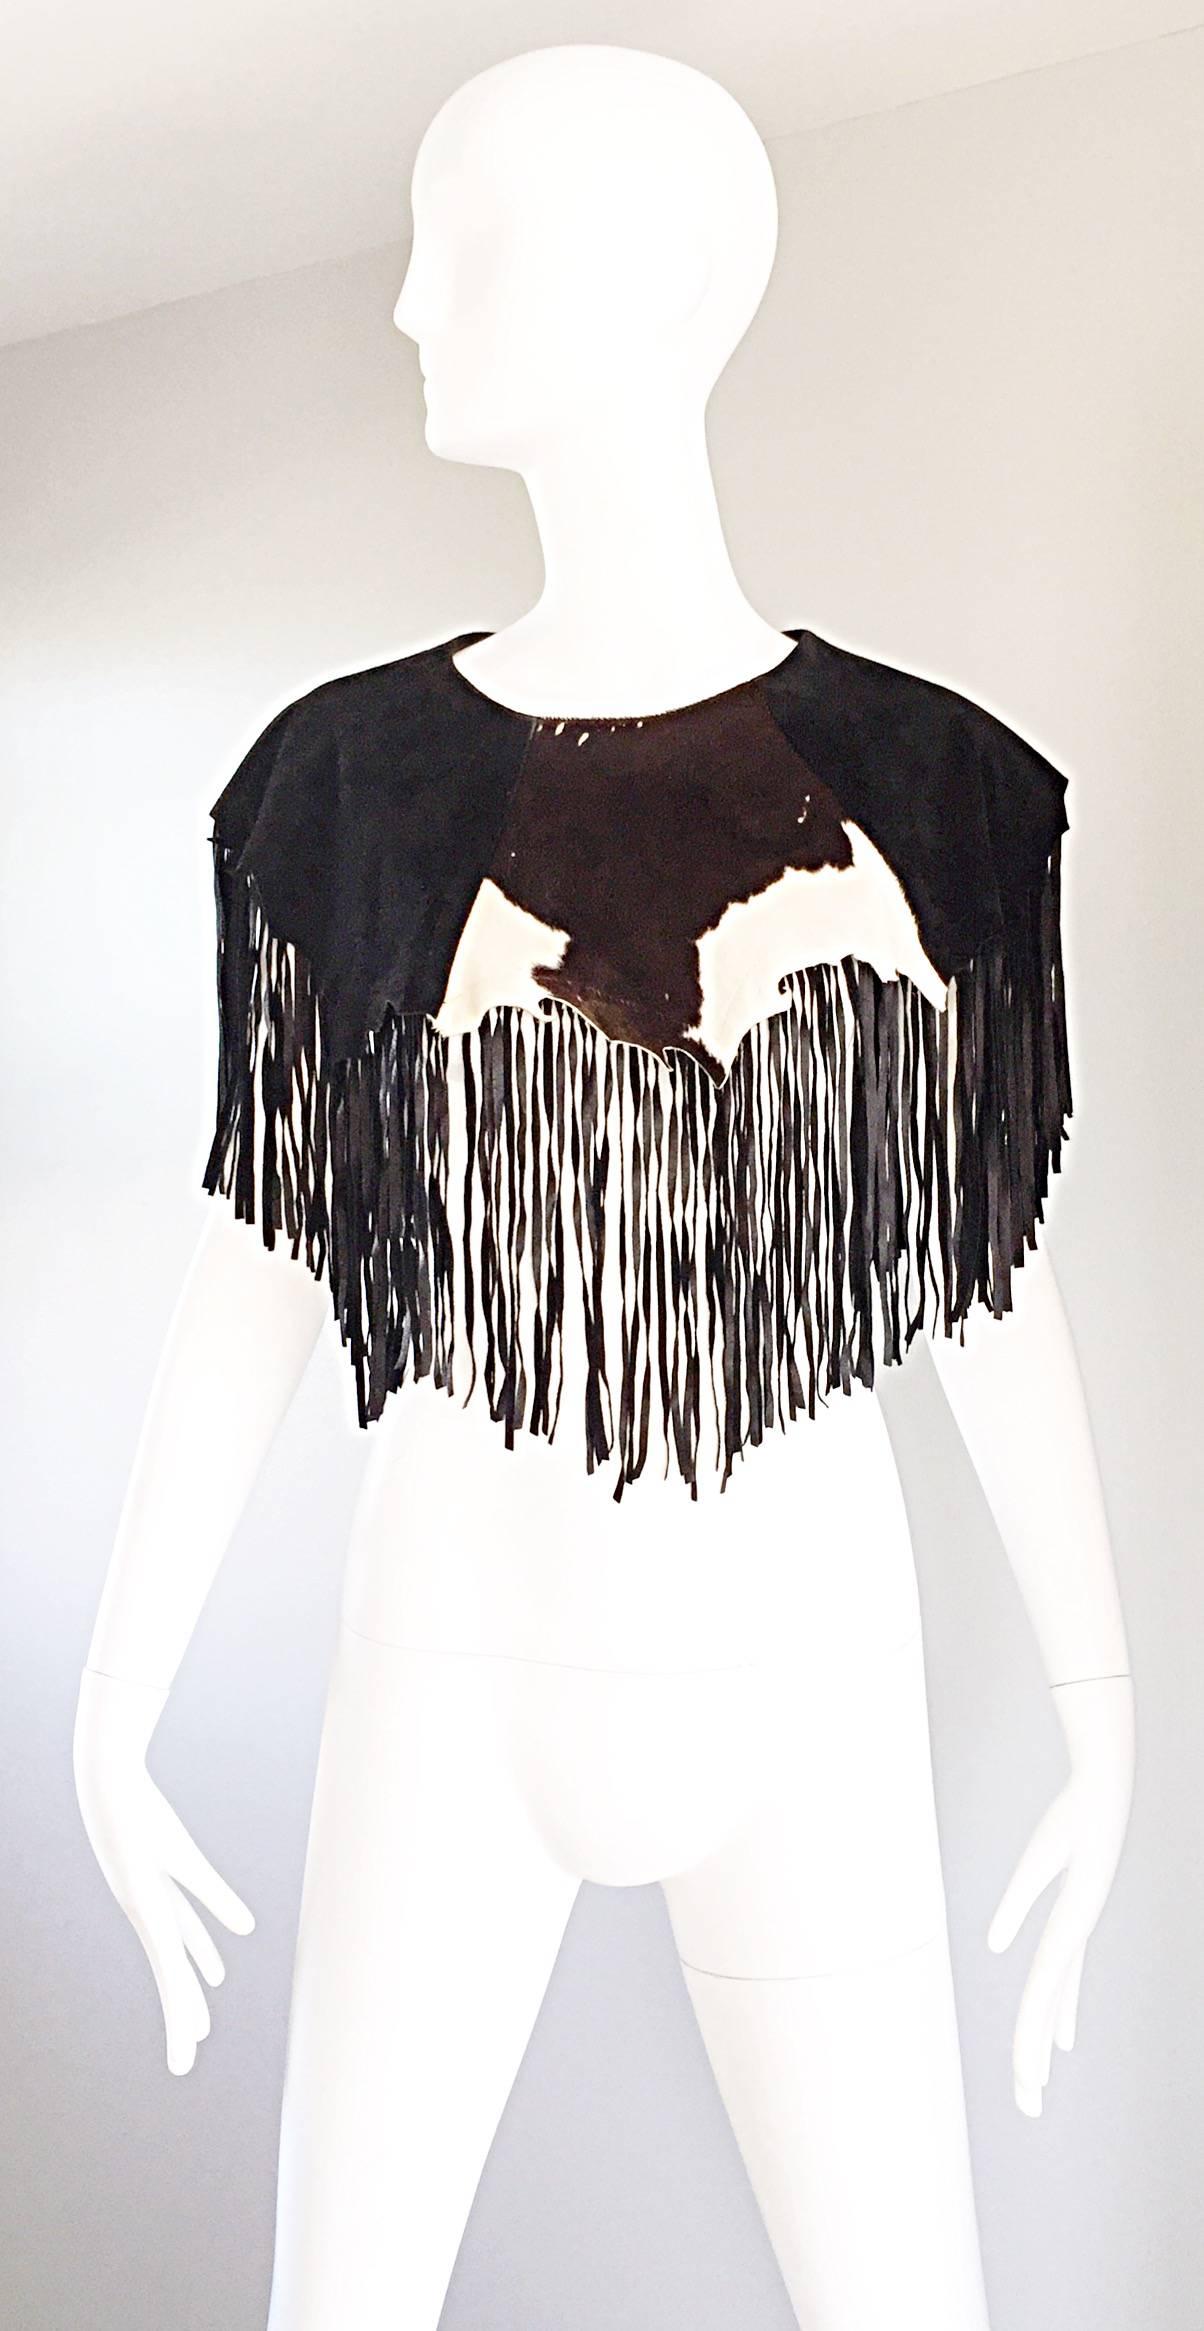 Incredibly chic vintage 1970s 70s RICKY NELL leather, suede, and cowhide leather fringed collar, bib or crop top! Features a brown and white cowhide, brown, and black leather and suede. Perfect over a tank, tee, or by itself. In great condition.